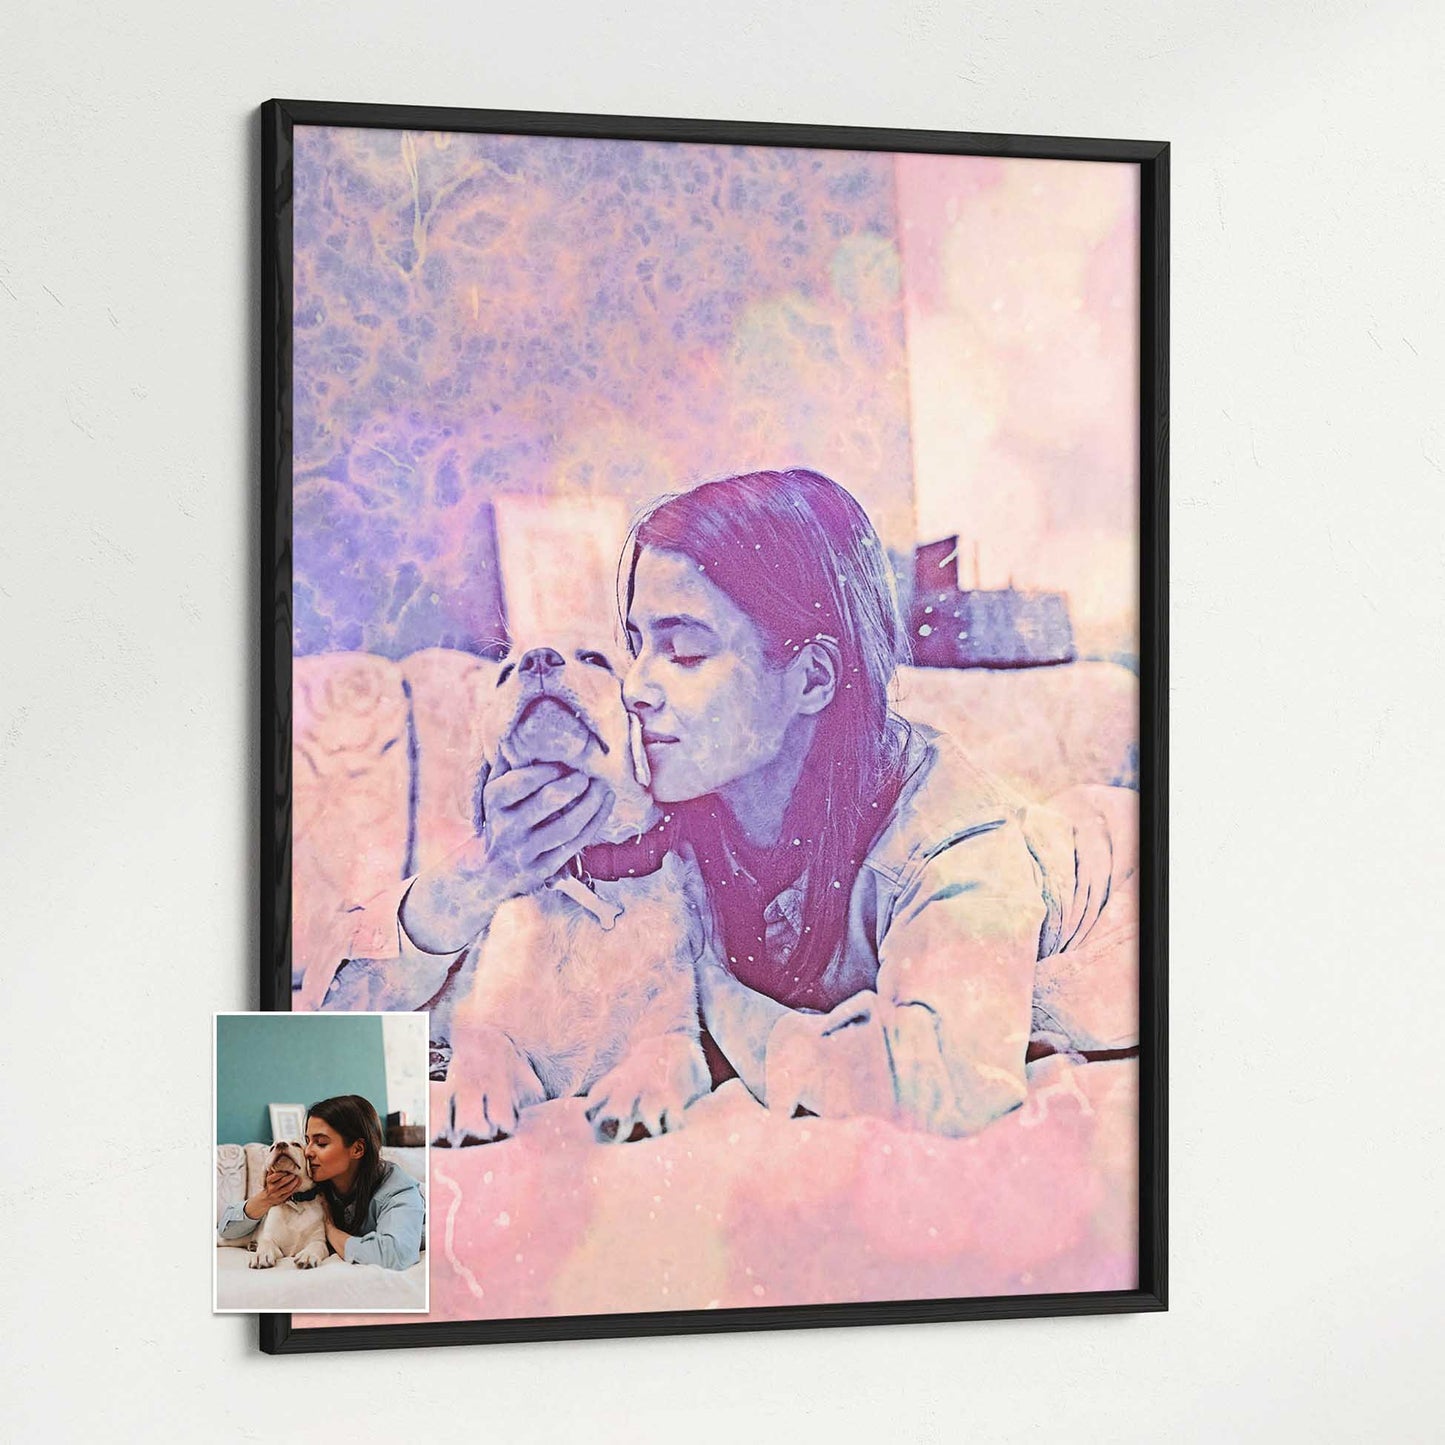 Personalised Special Purple FX Framed Print: Embrace the beauty of colors with a captivating bokeh effect. Printed on gallery-quality paper and encased in a wooden frame, this original and unique artwork is created from your photo